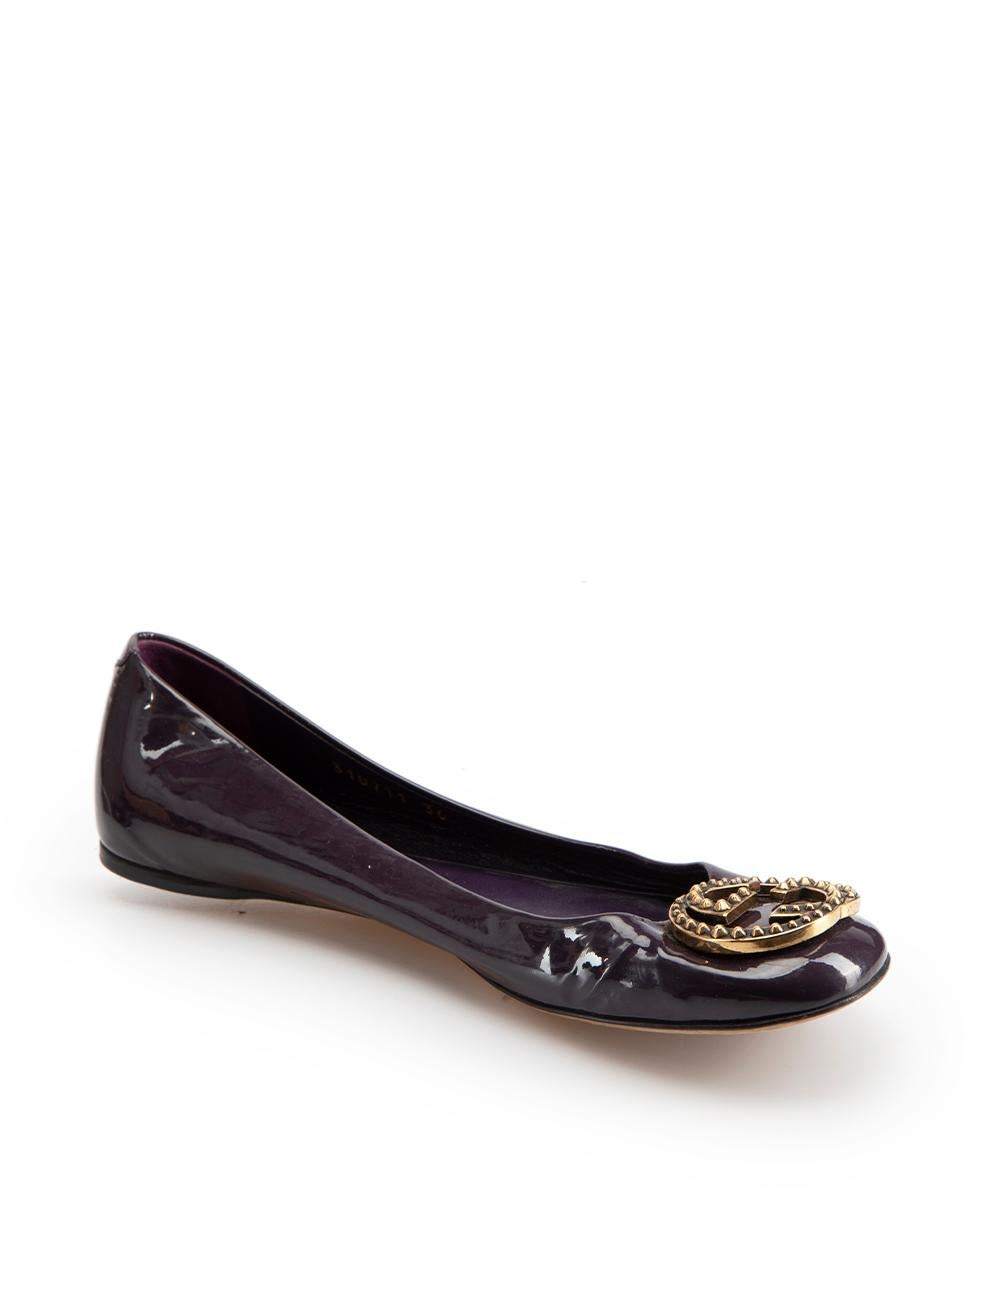 CONDITION is Good. Minor wear to shoes is evident. Light wear to both shoes with general creasing of the leather on this used Gucci designer resale item.
  
Details
Purple
Patent leather
Ballet flats
Round toe
Slip on
'GG' buckle detail
  
Made in